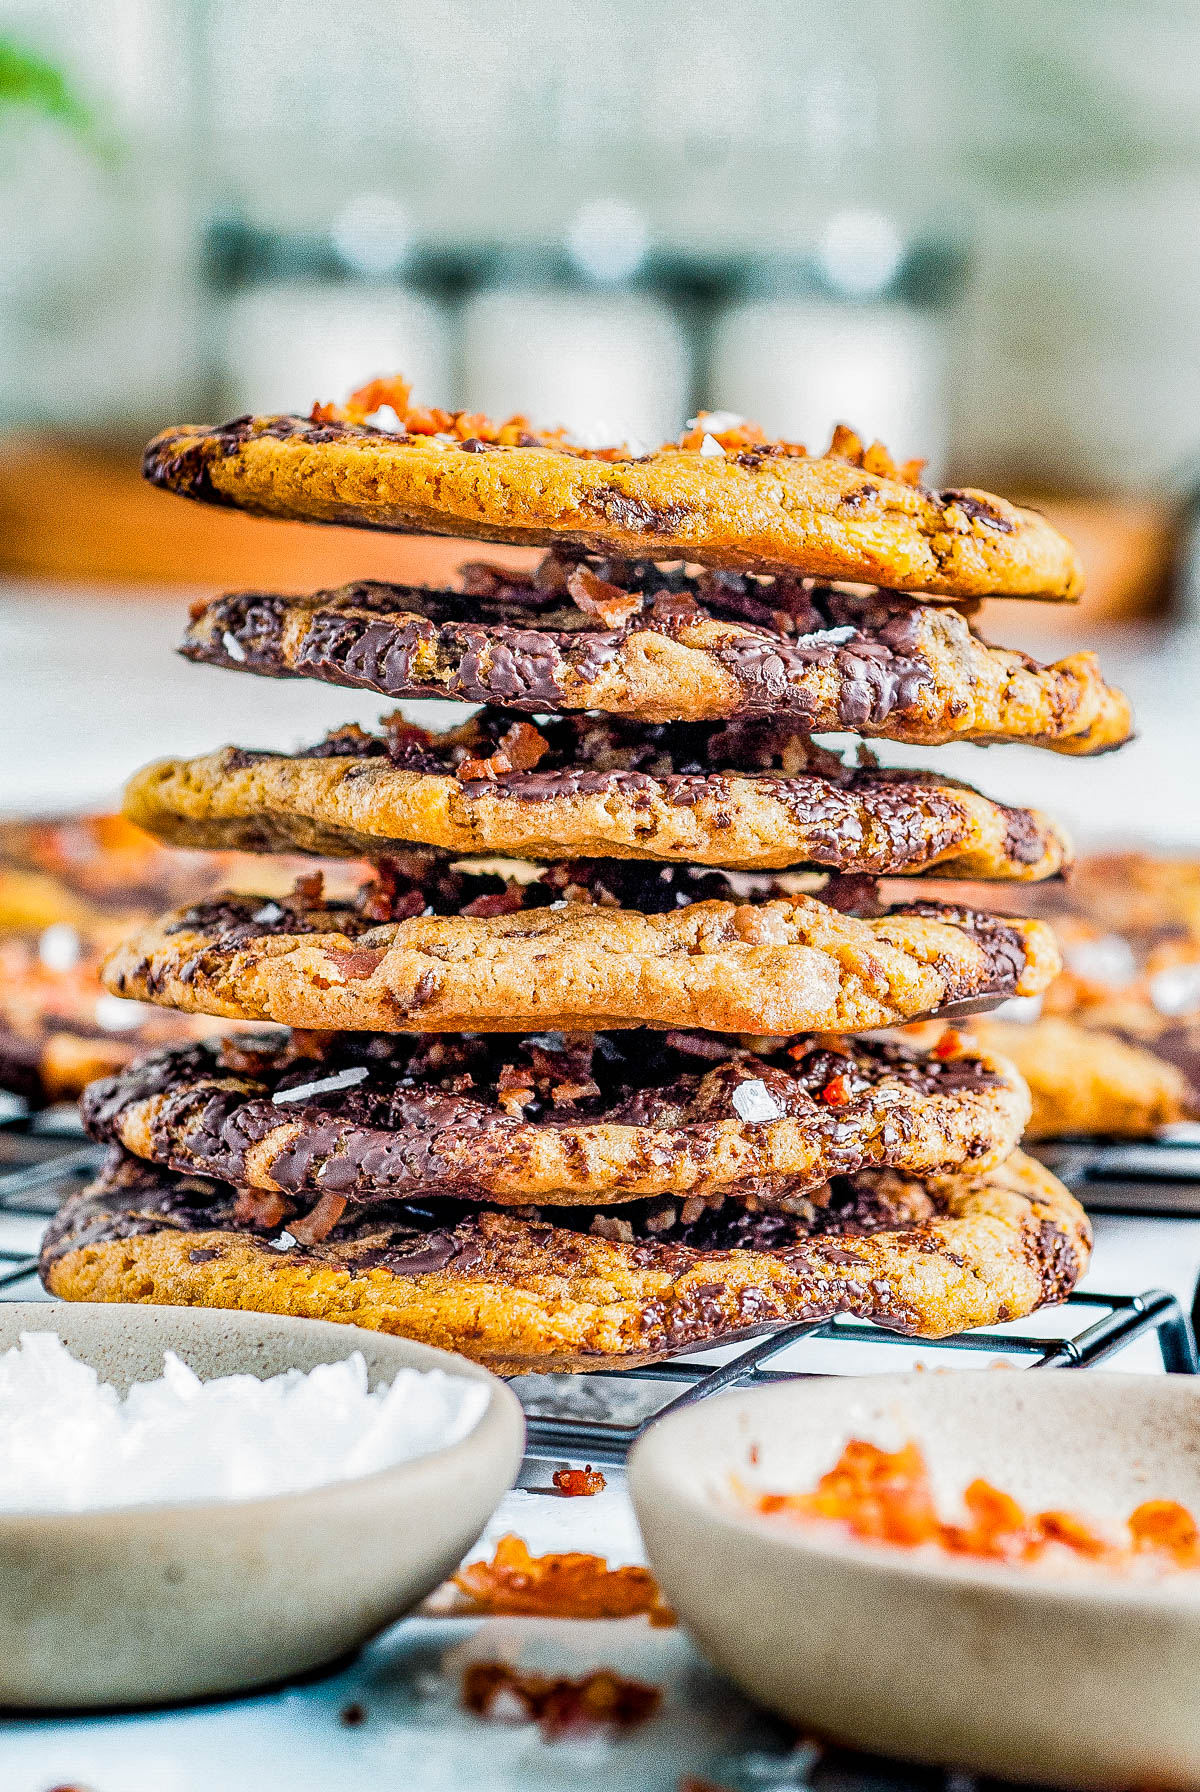 Bacon Chocolate Chip Cookies - These decadent and indulgent chocolate chip cookies are the perfect balance of savory, salty and sweet in every delectable chewy bite! With crispy bacon, butterscotch chips, tons of melted chocolate, and flaky sea salt, they're a flavor explosion for those bold enough to give them a try! 